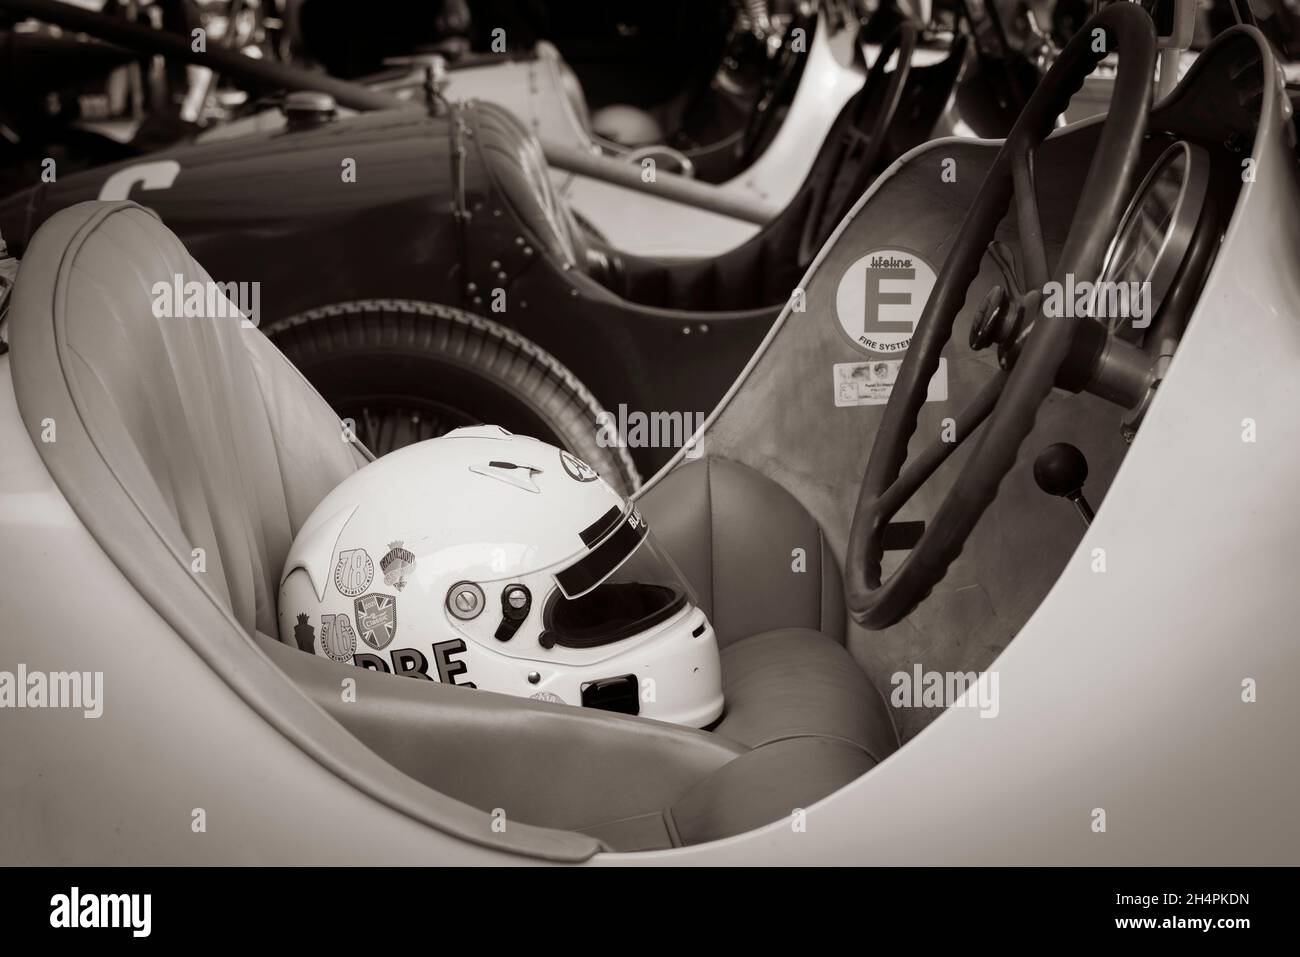 Bugatti cockpit with helmet on the seat. In the paddock at the Goodwood 78th Members Meeting, Sussex, UK. Stock Photo